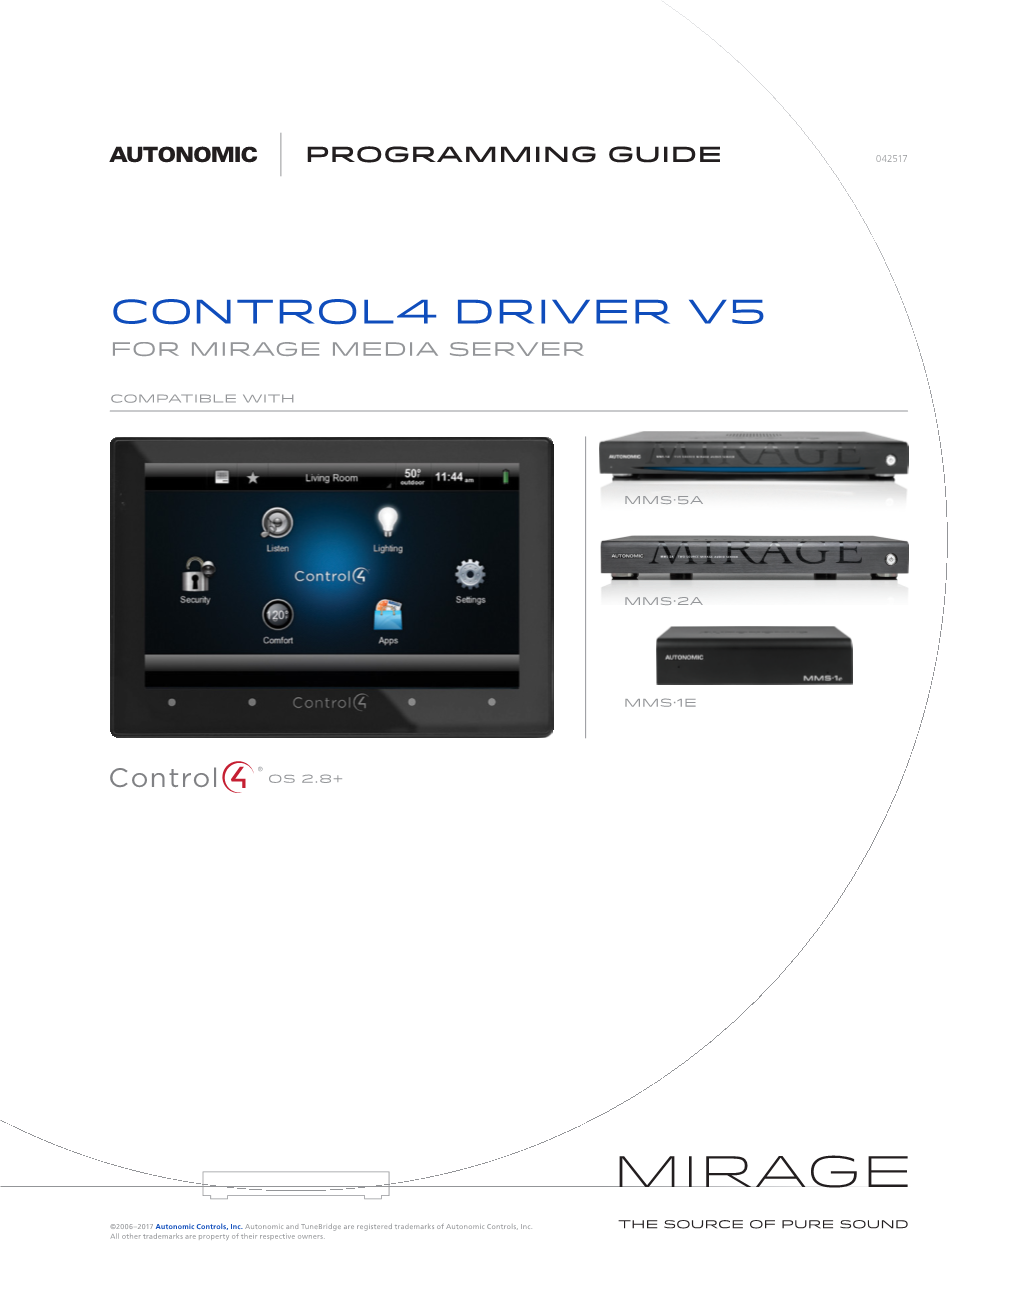 Control4 Driver V5 for Mirage Media Server Compatible With